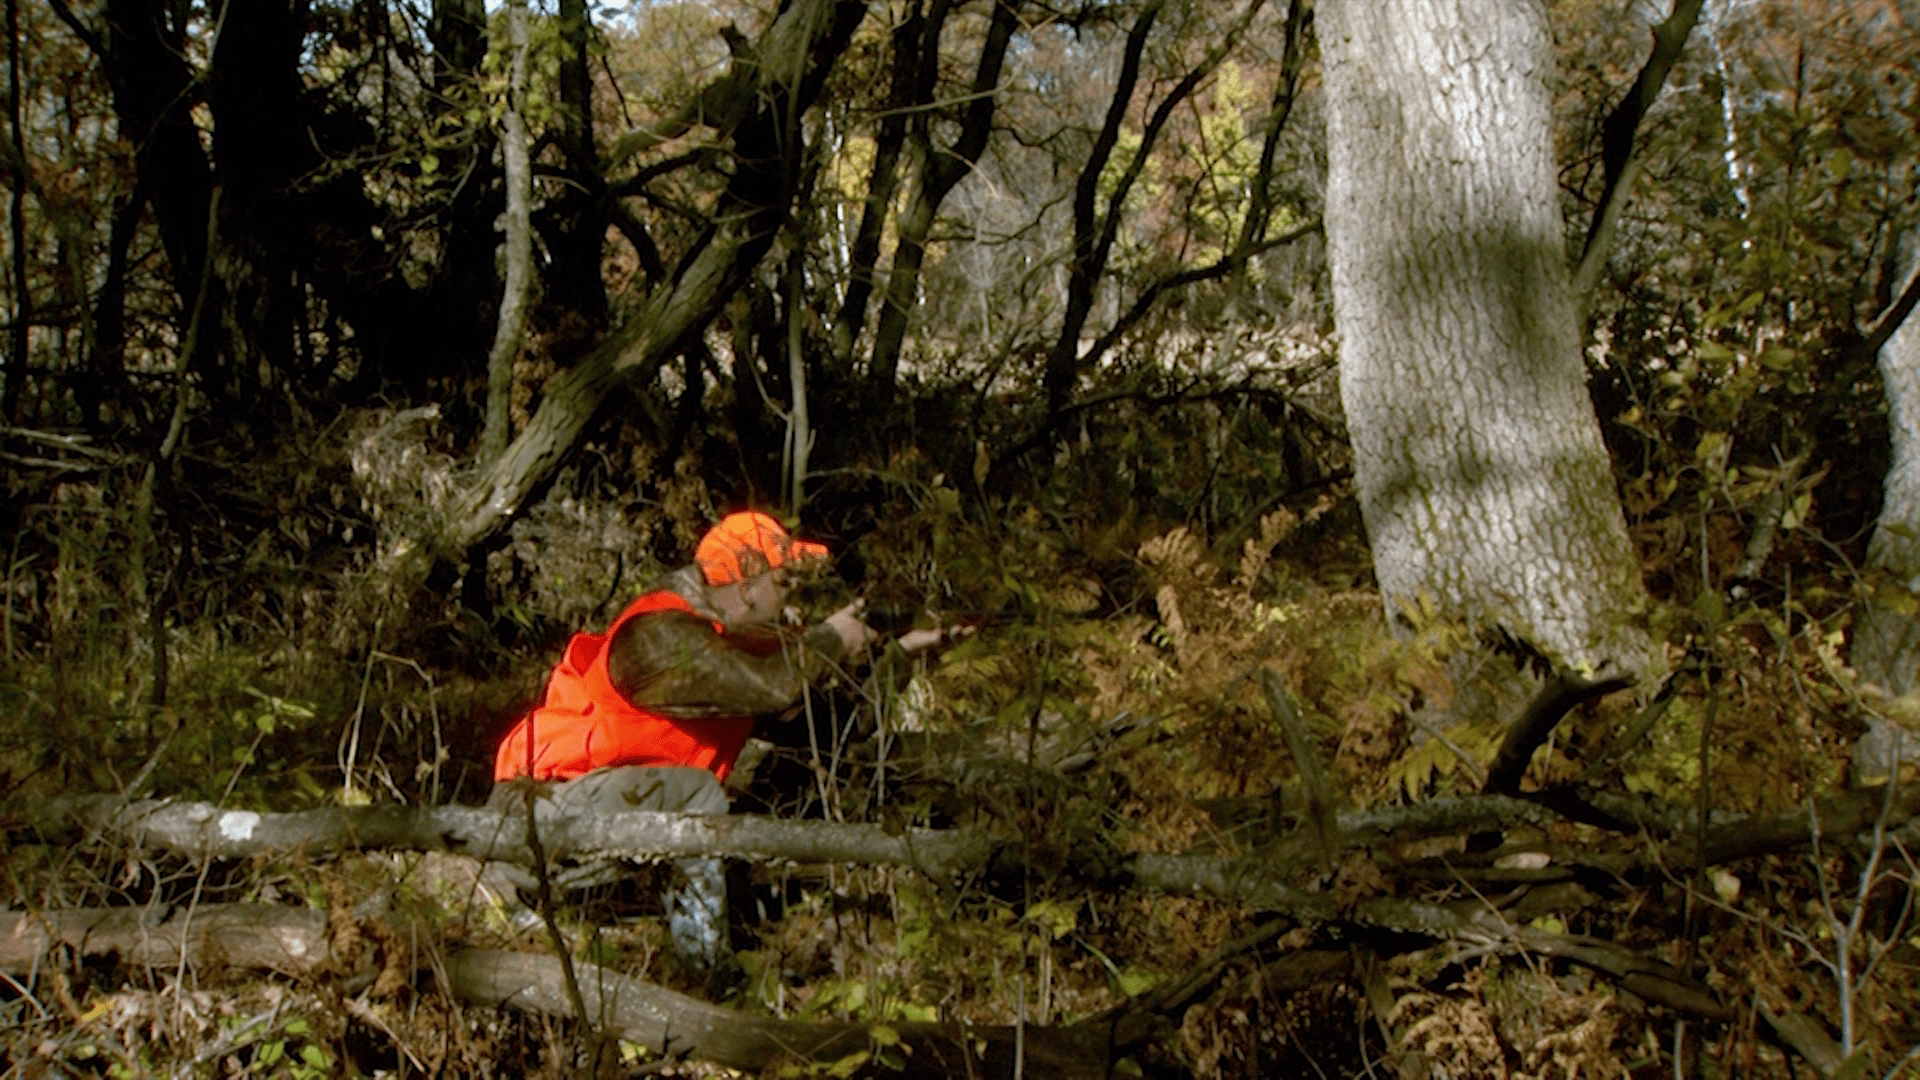 A picture of a man in the woods hunting